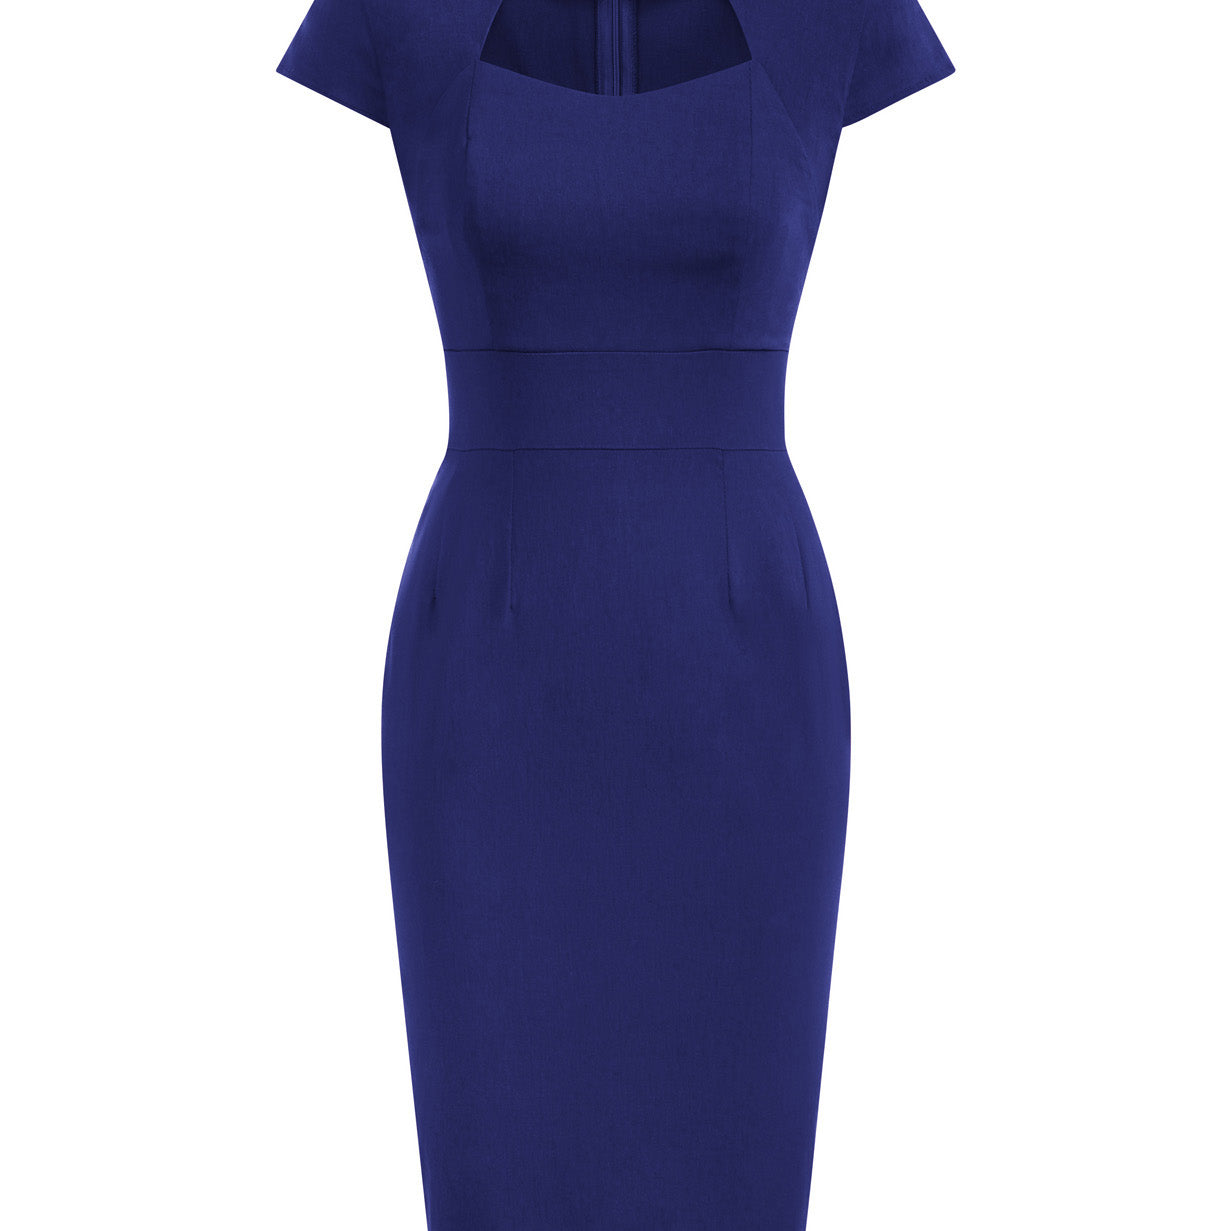 Vintage Cap Sleeve High Stretchy Hips-Wrapped Bodycon Pencil Dress